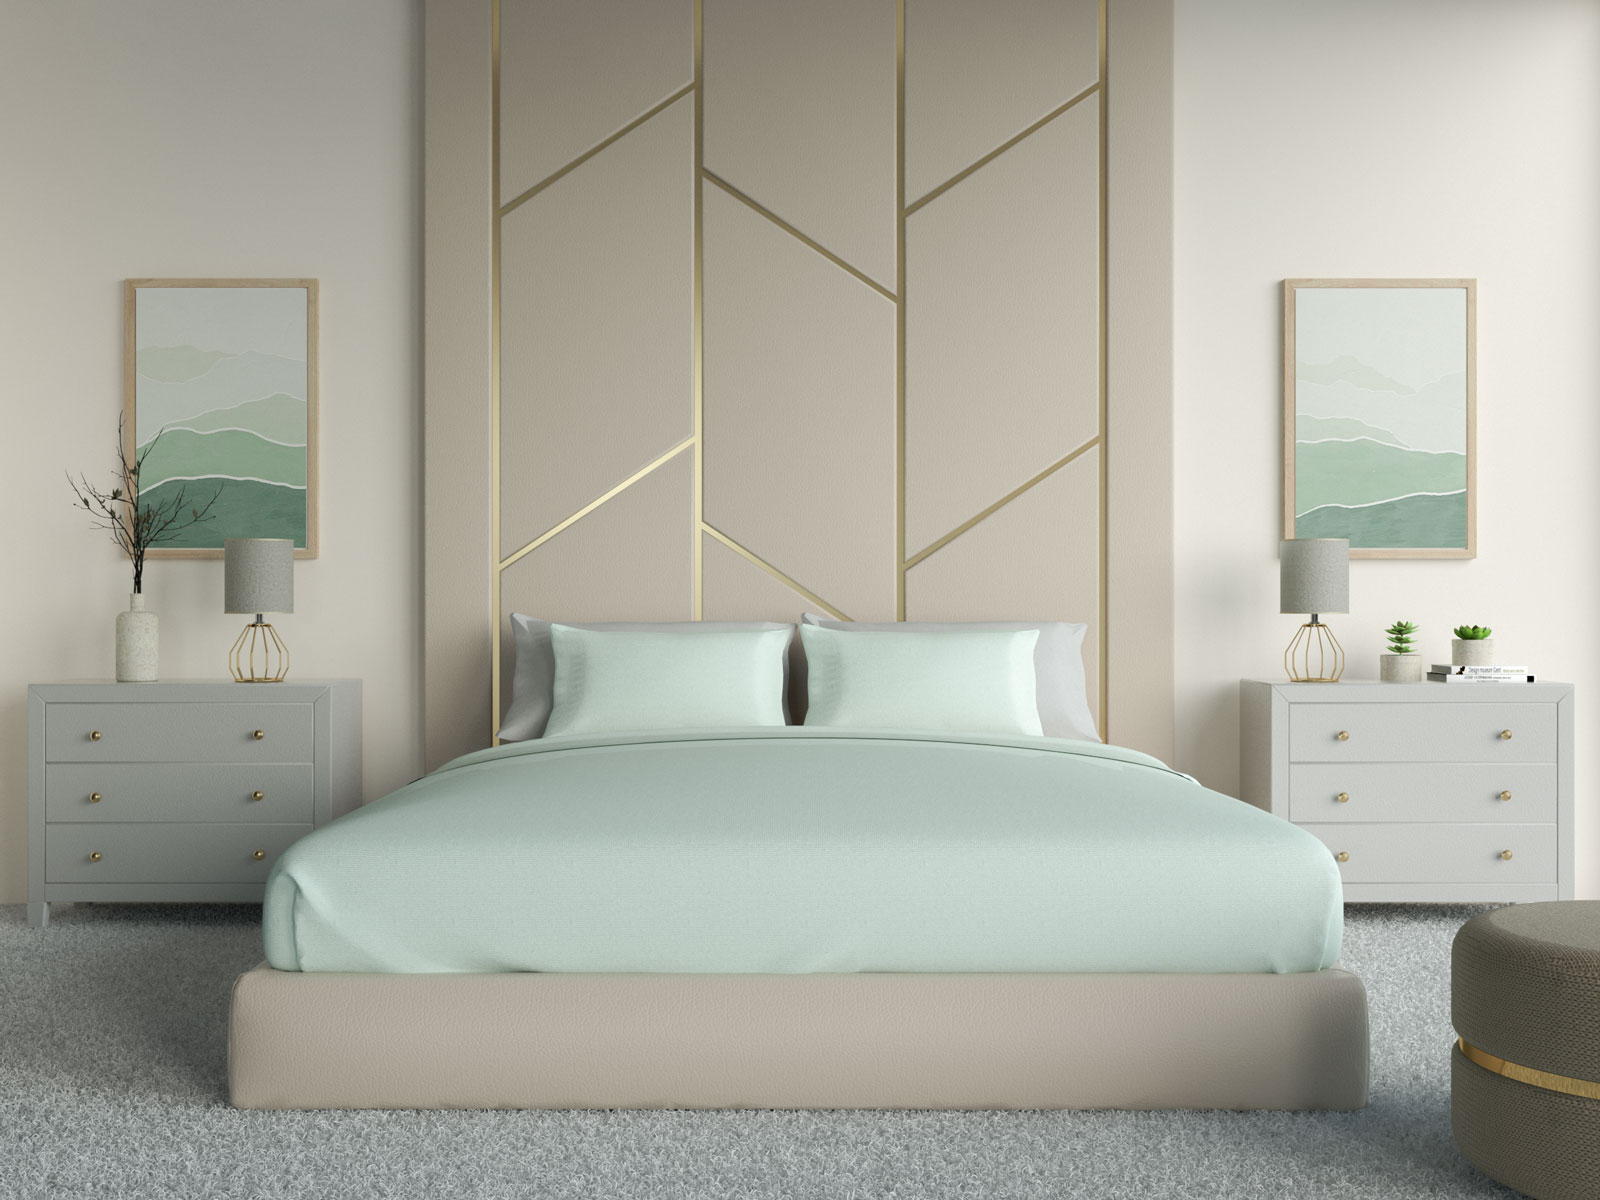 Bedroom ideas with mint green bedding and beige headboard